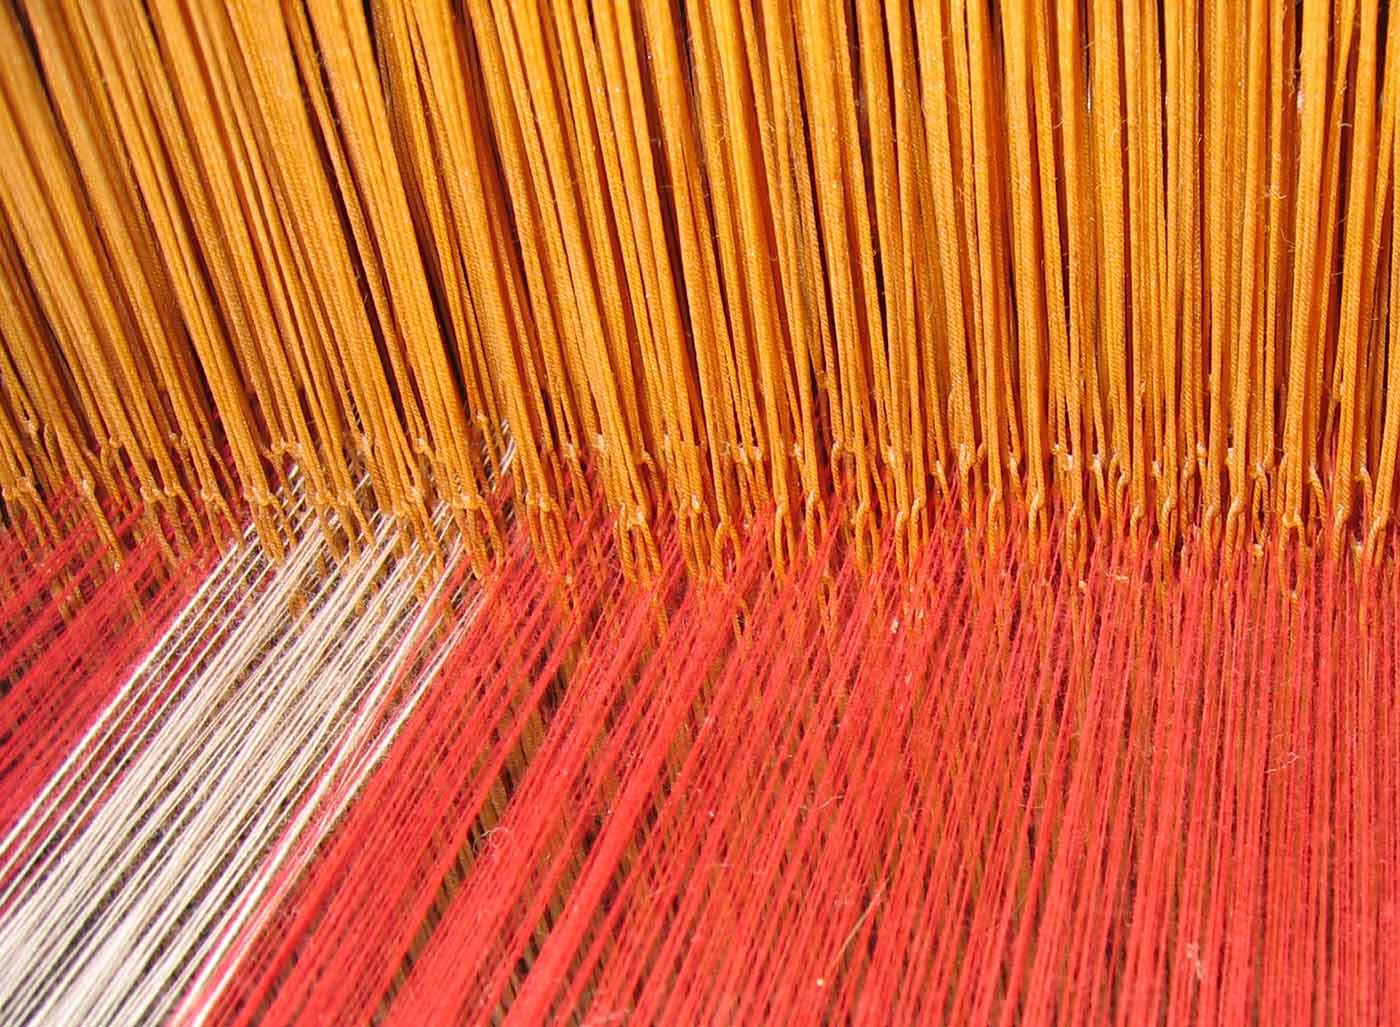 A loom in the Musée du Textile in Cholet, France.